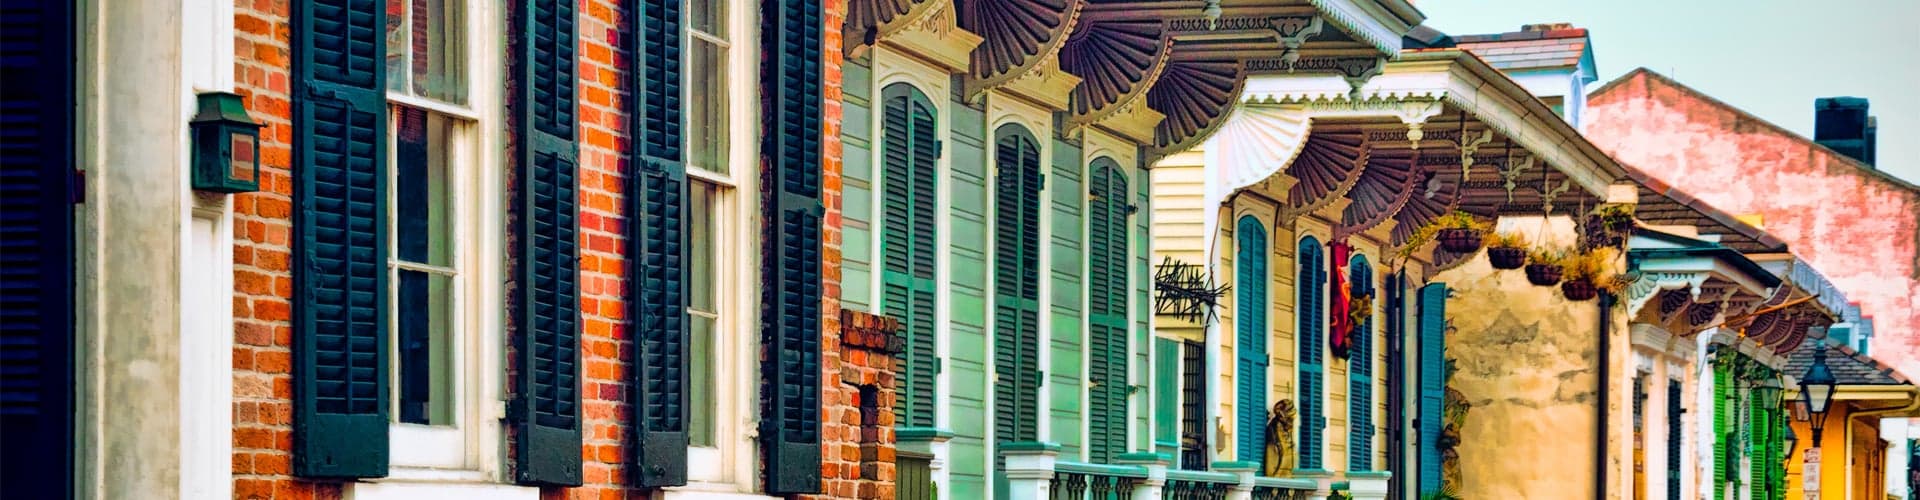 Free French Quarter & Cemetery Tour Banner